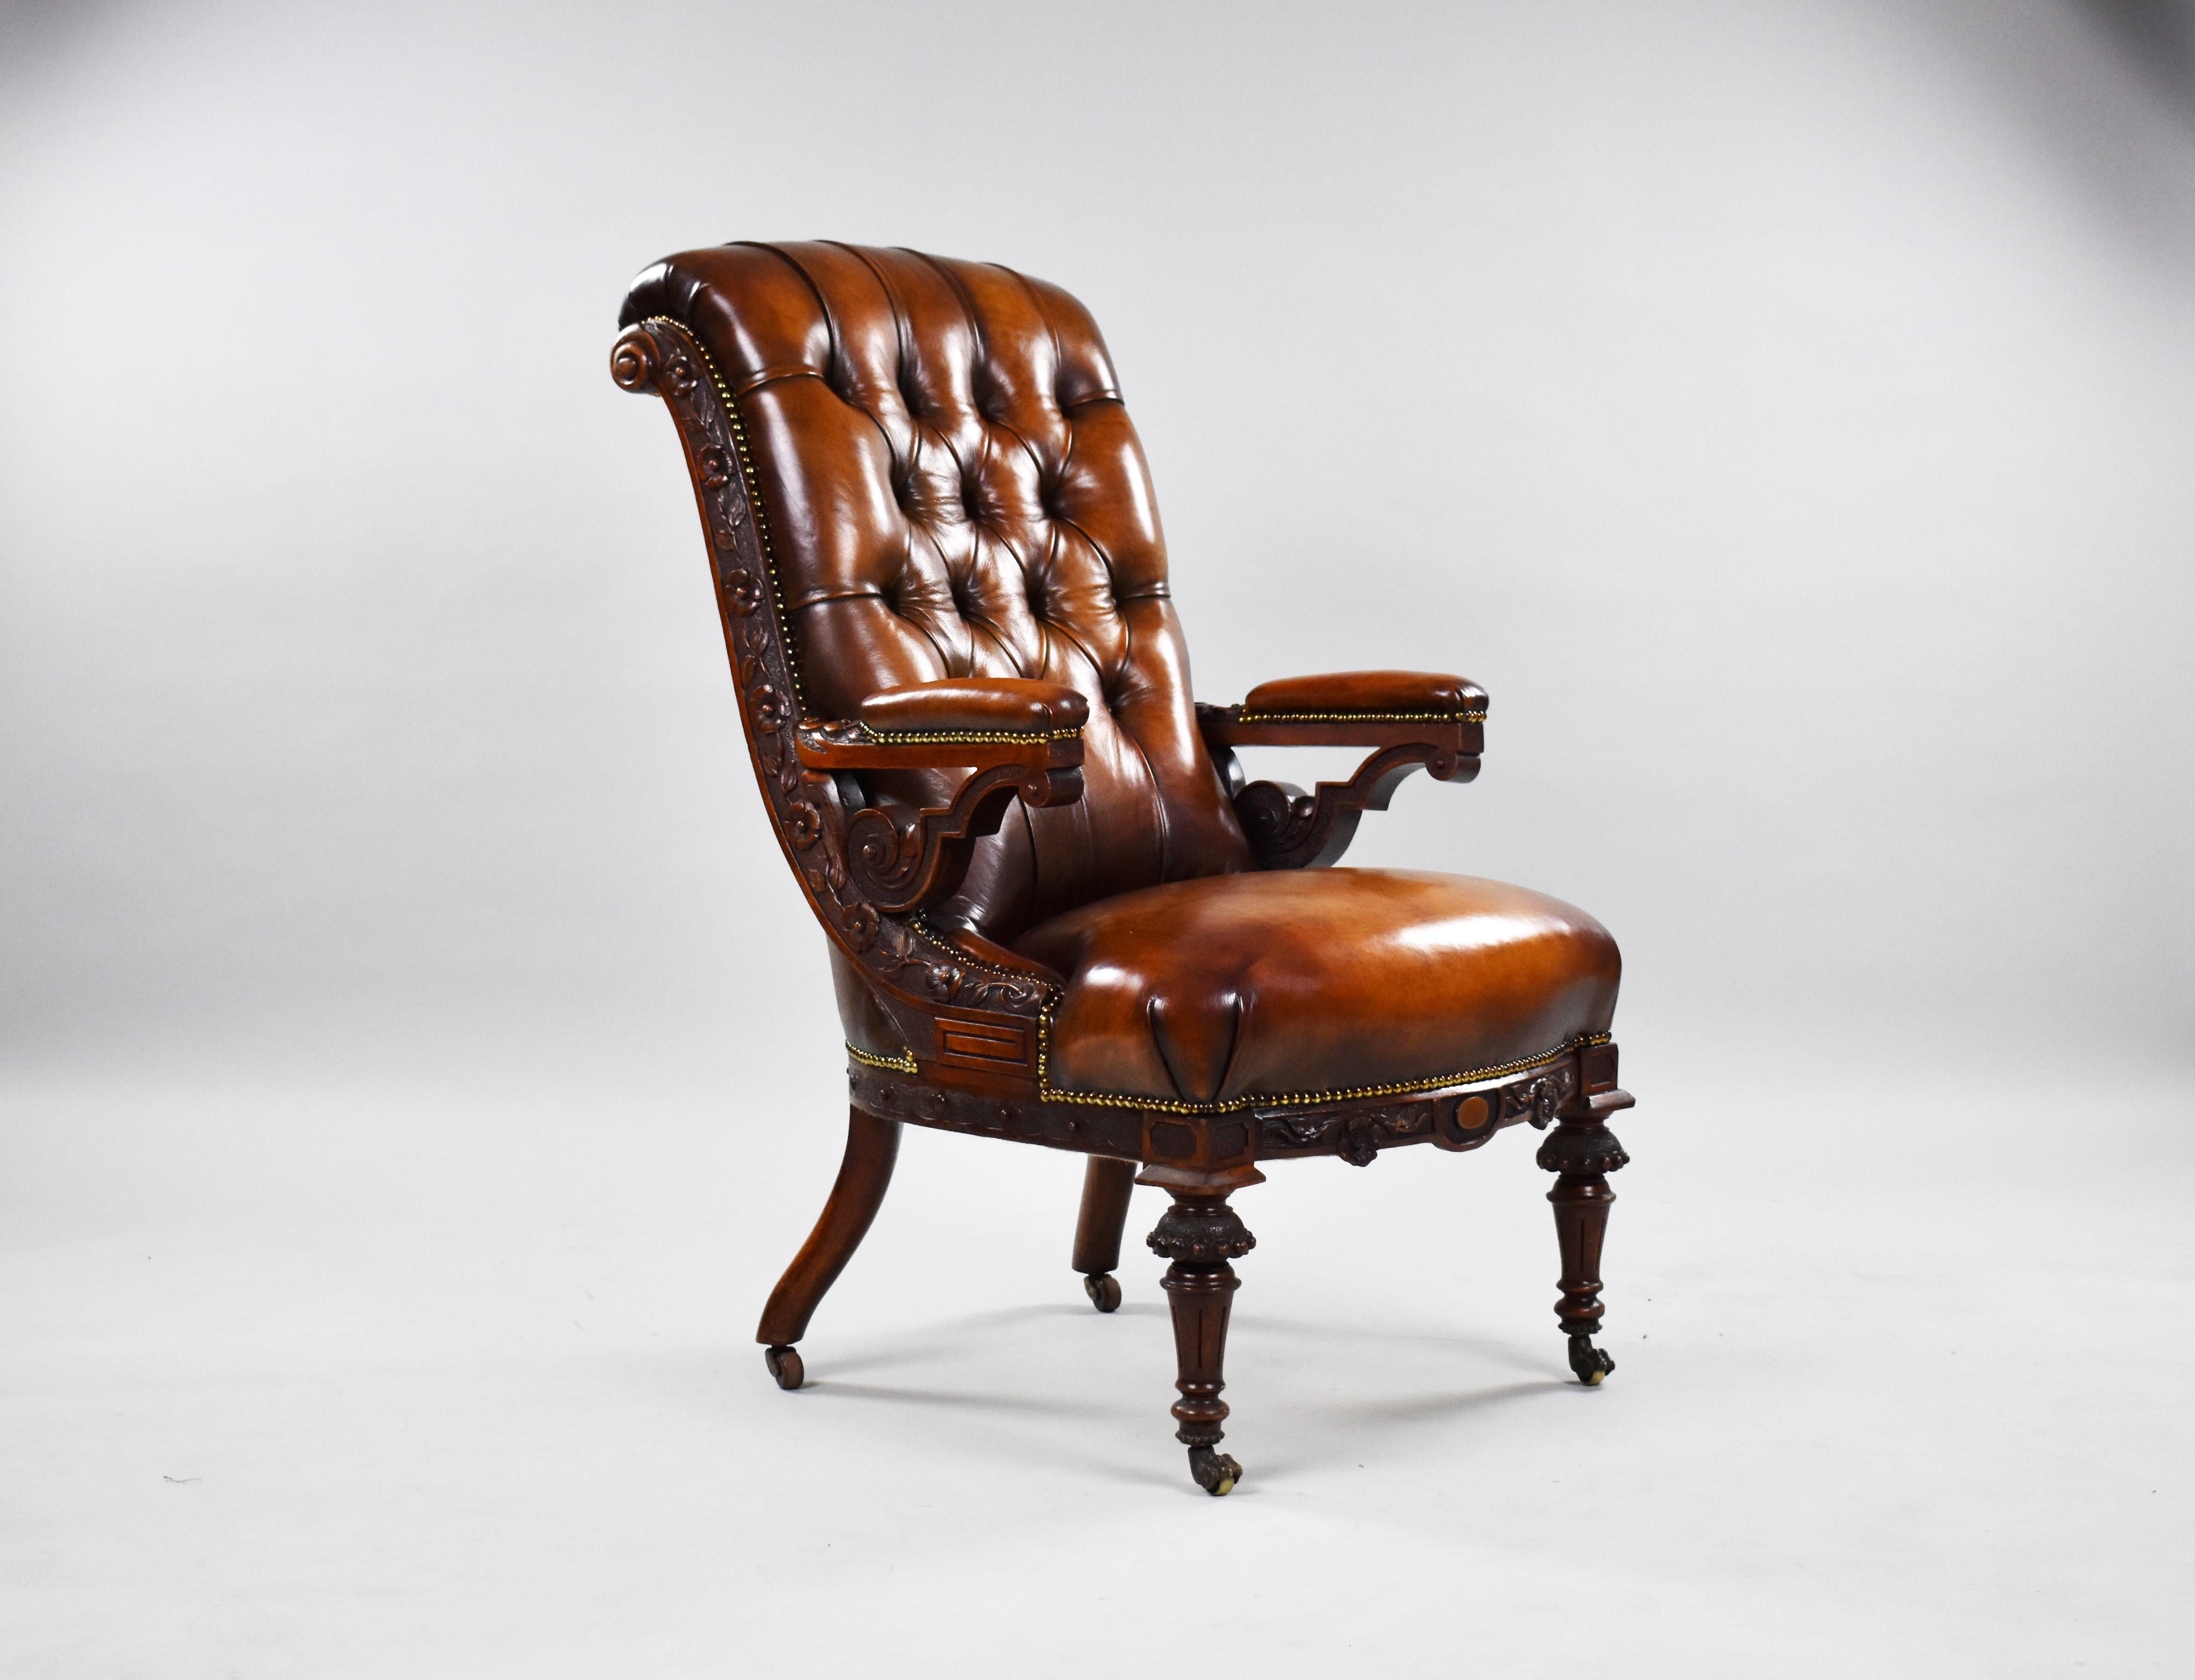 For sale is a fine quality William IV mahogany armchair. Upholstered in hand dyed leather, having a deep buttoned back, in an ornate foliate carved show frame raised on fluted legs with highly unusual brass paw castors. The chair is in very good